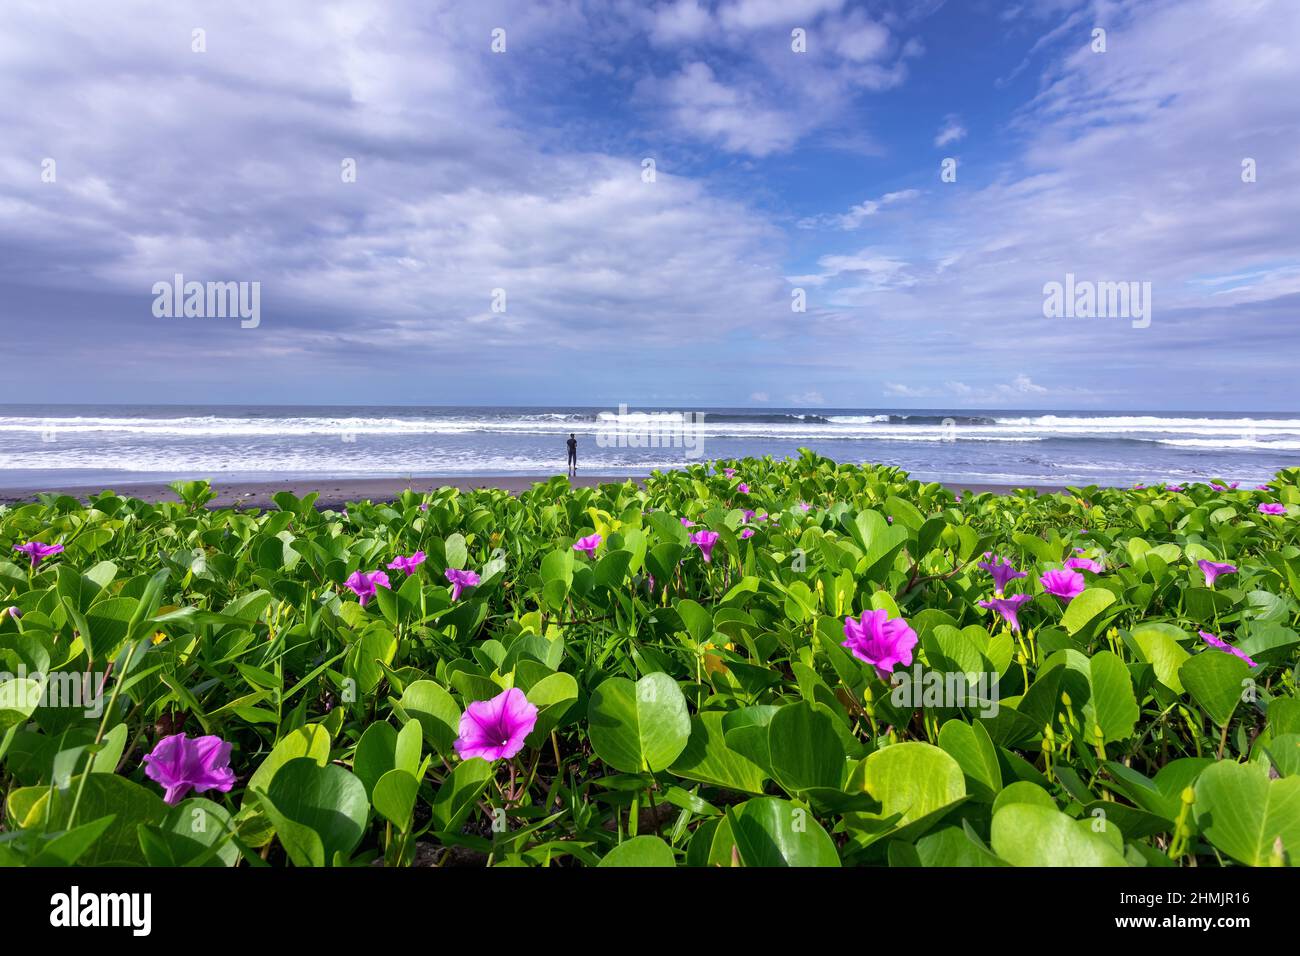 Scenery of sunny day with pink flower in seascape, sand beach, turquoise ocean. View of Diamond beach, Nusa Penida, Bali island, Indonesia. Wallpaper Stock Photo